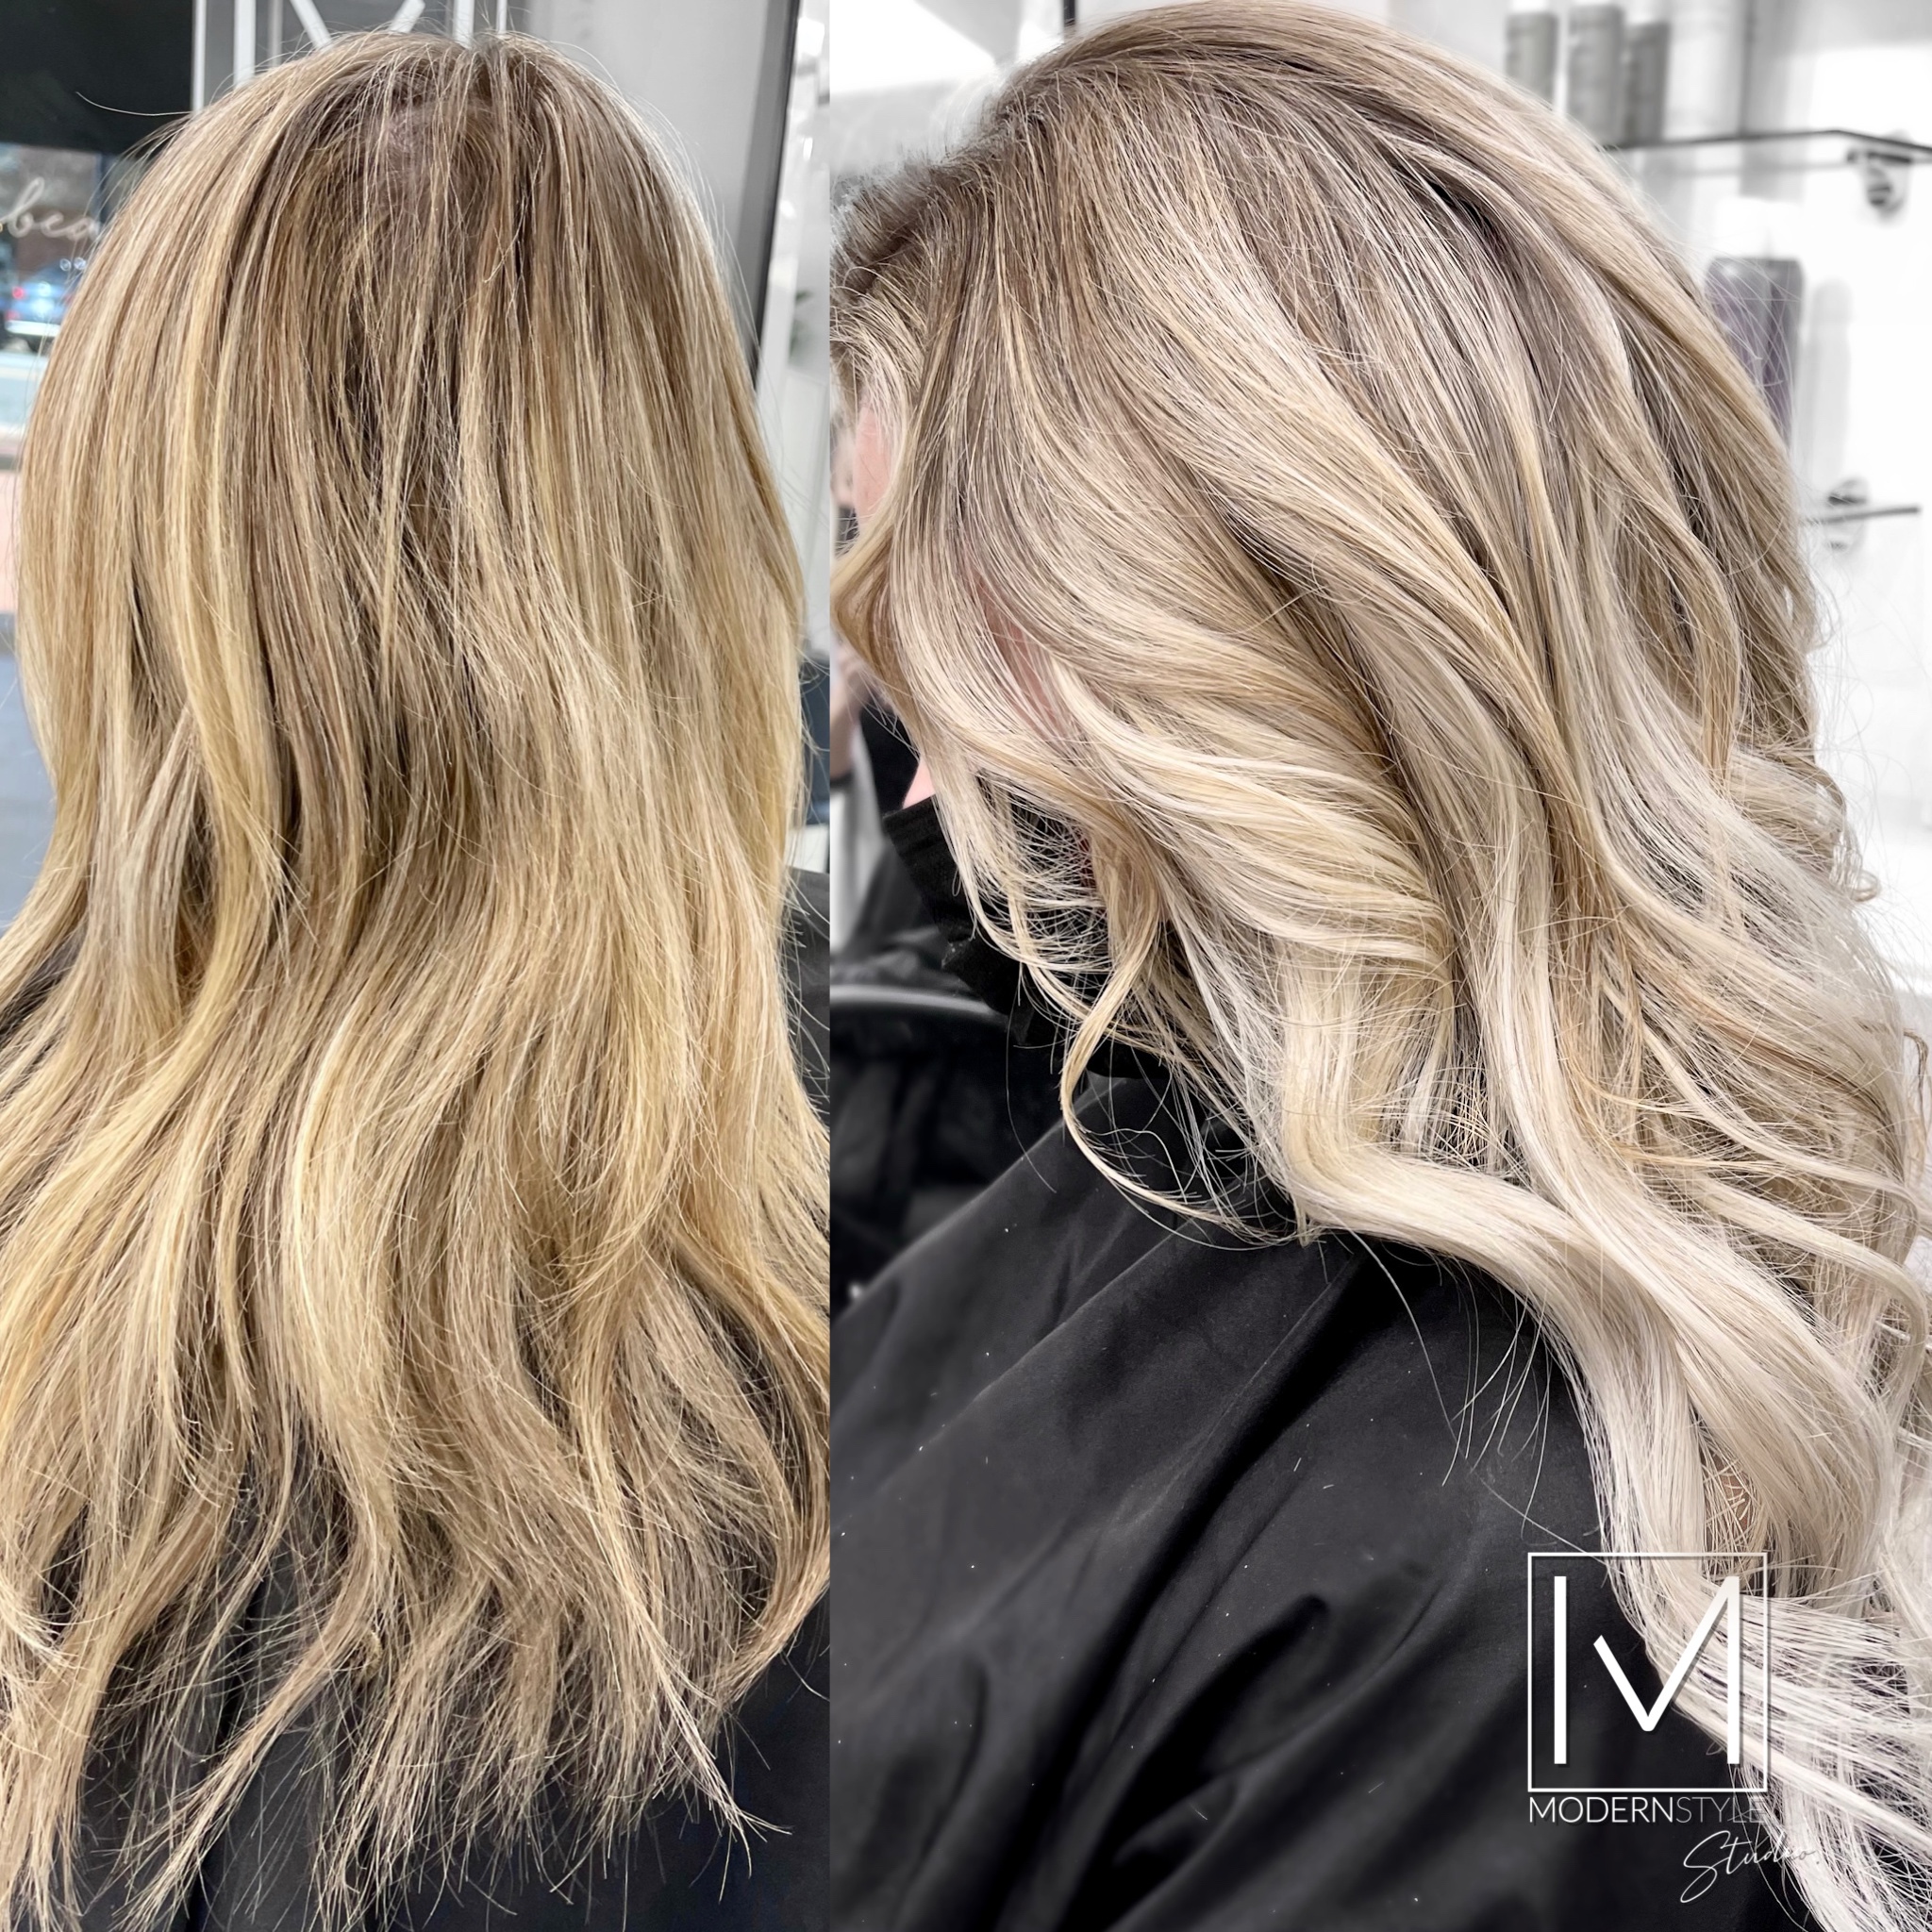 Hair extensions near me, best hair extensions Charlotte, salons near me, top colorists near me, best balayage near me, best hair stylist near me